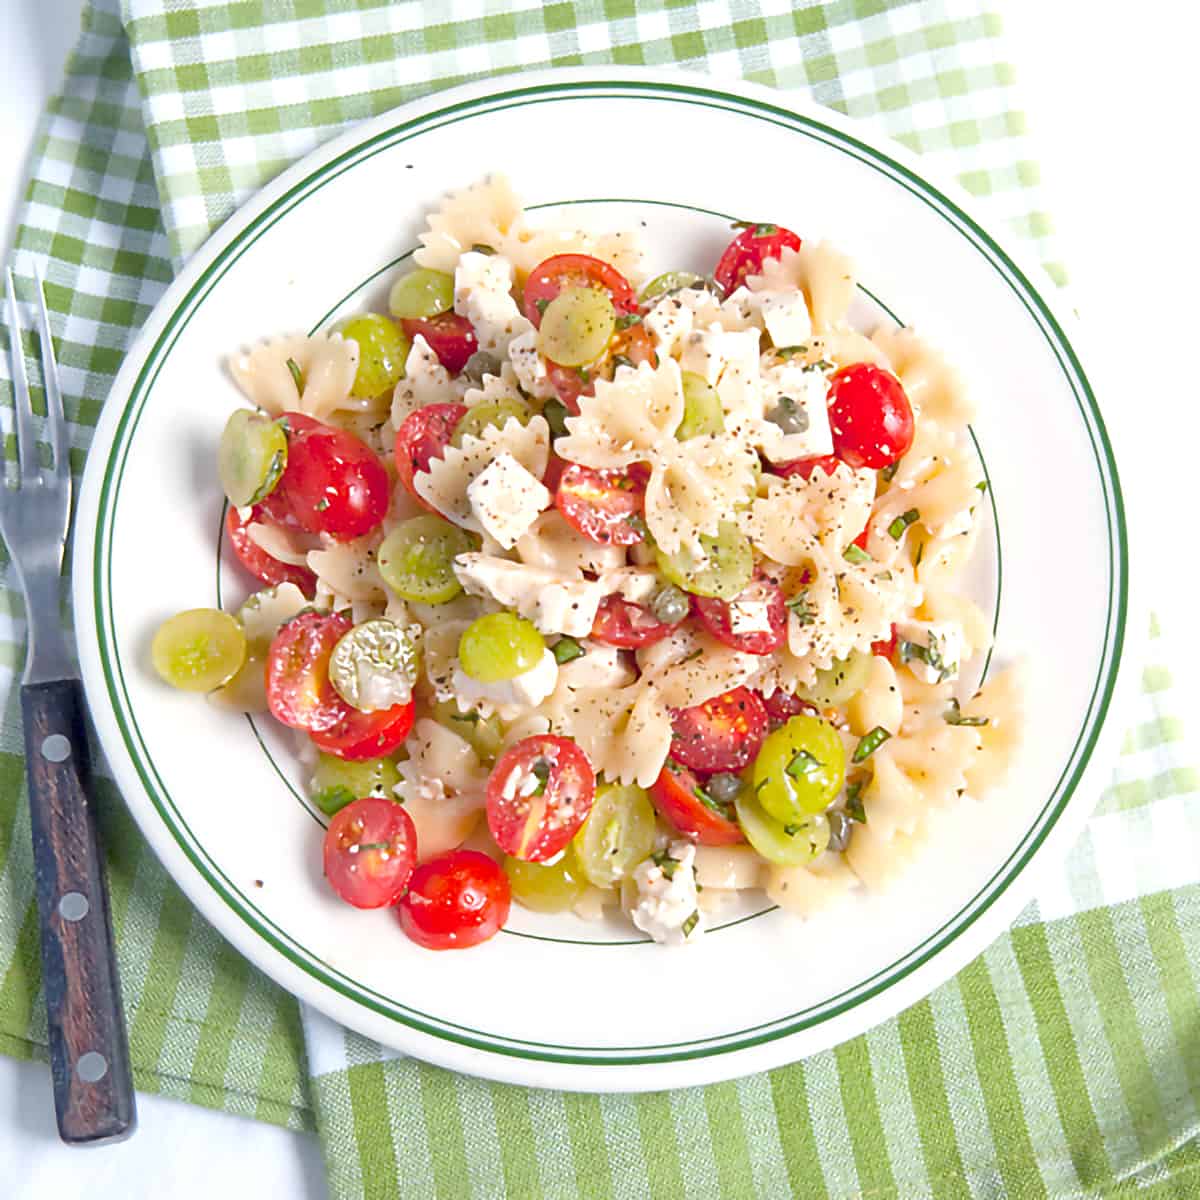 Bow Tie Pasta Salad with Tomatoes and Grapes